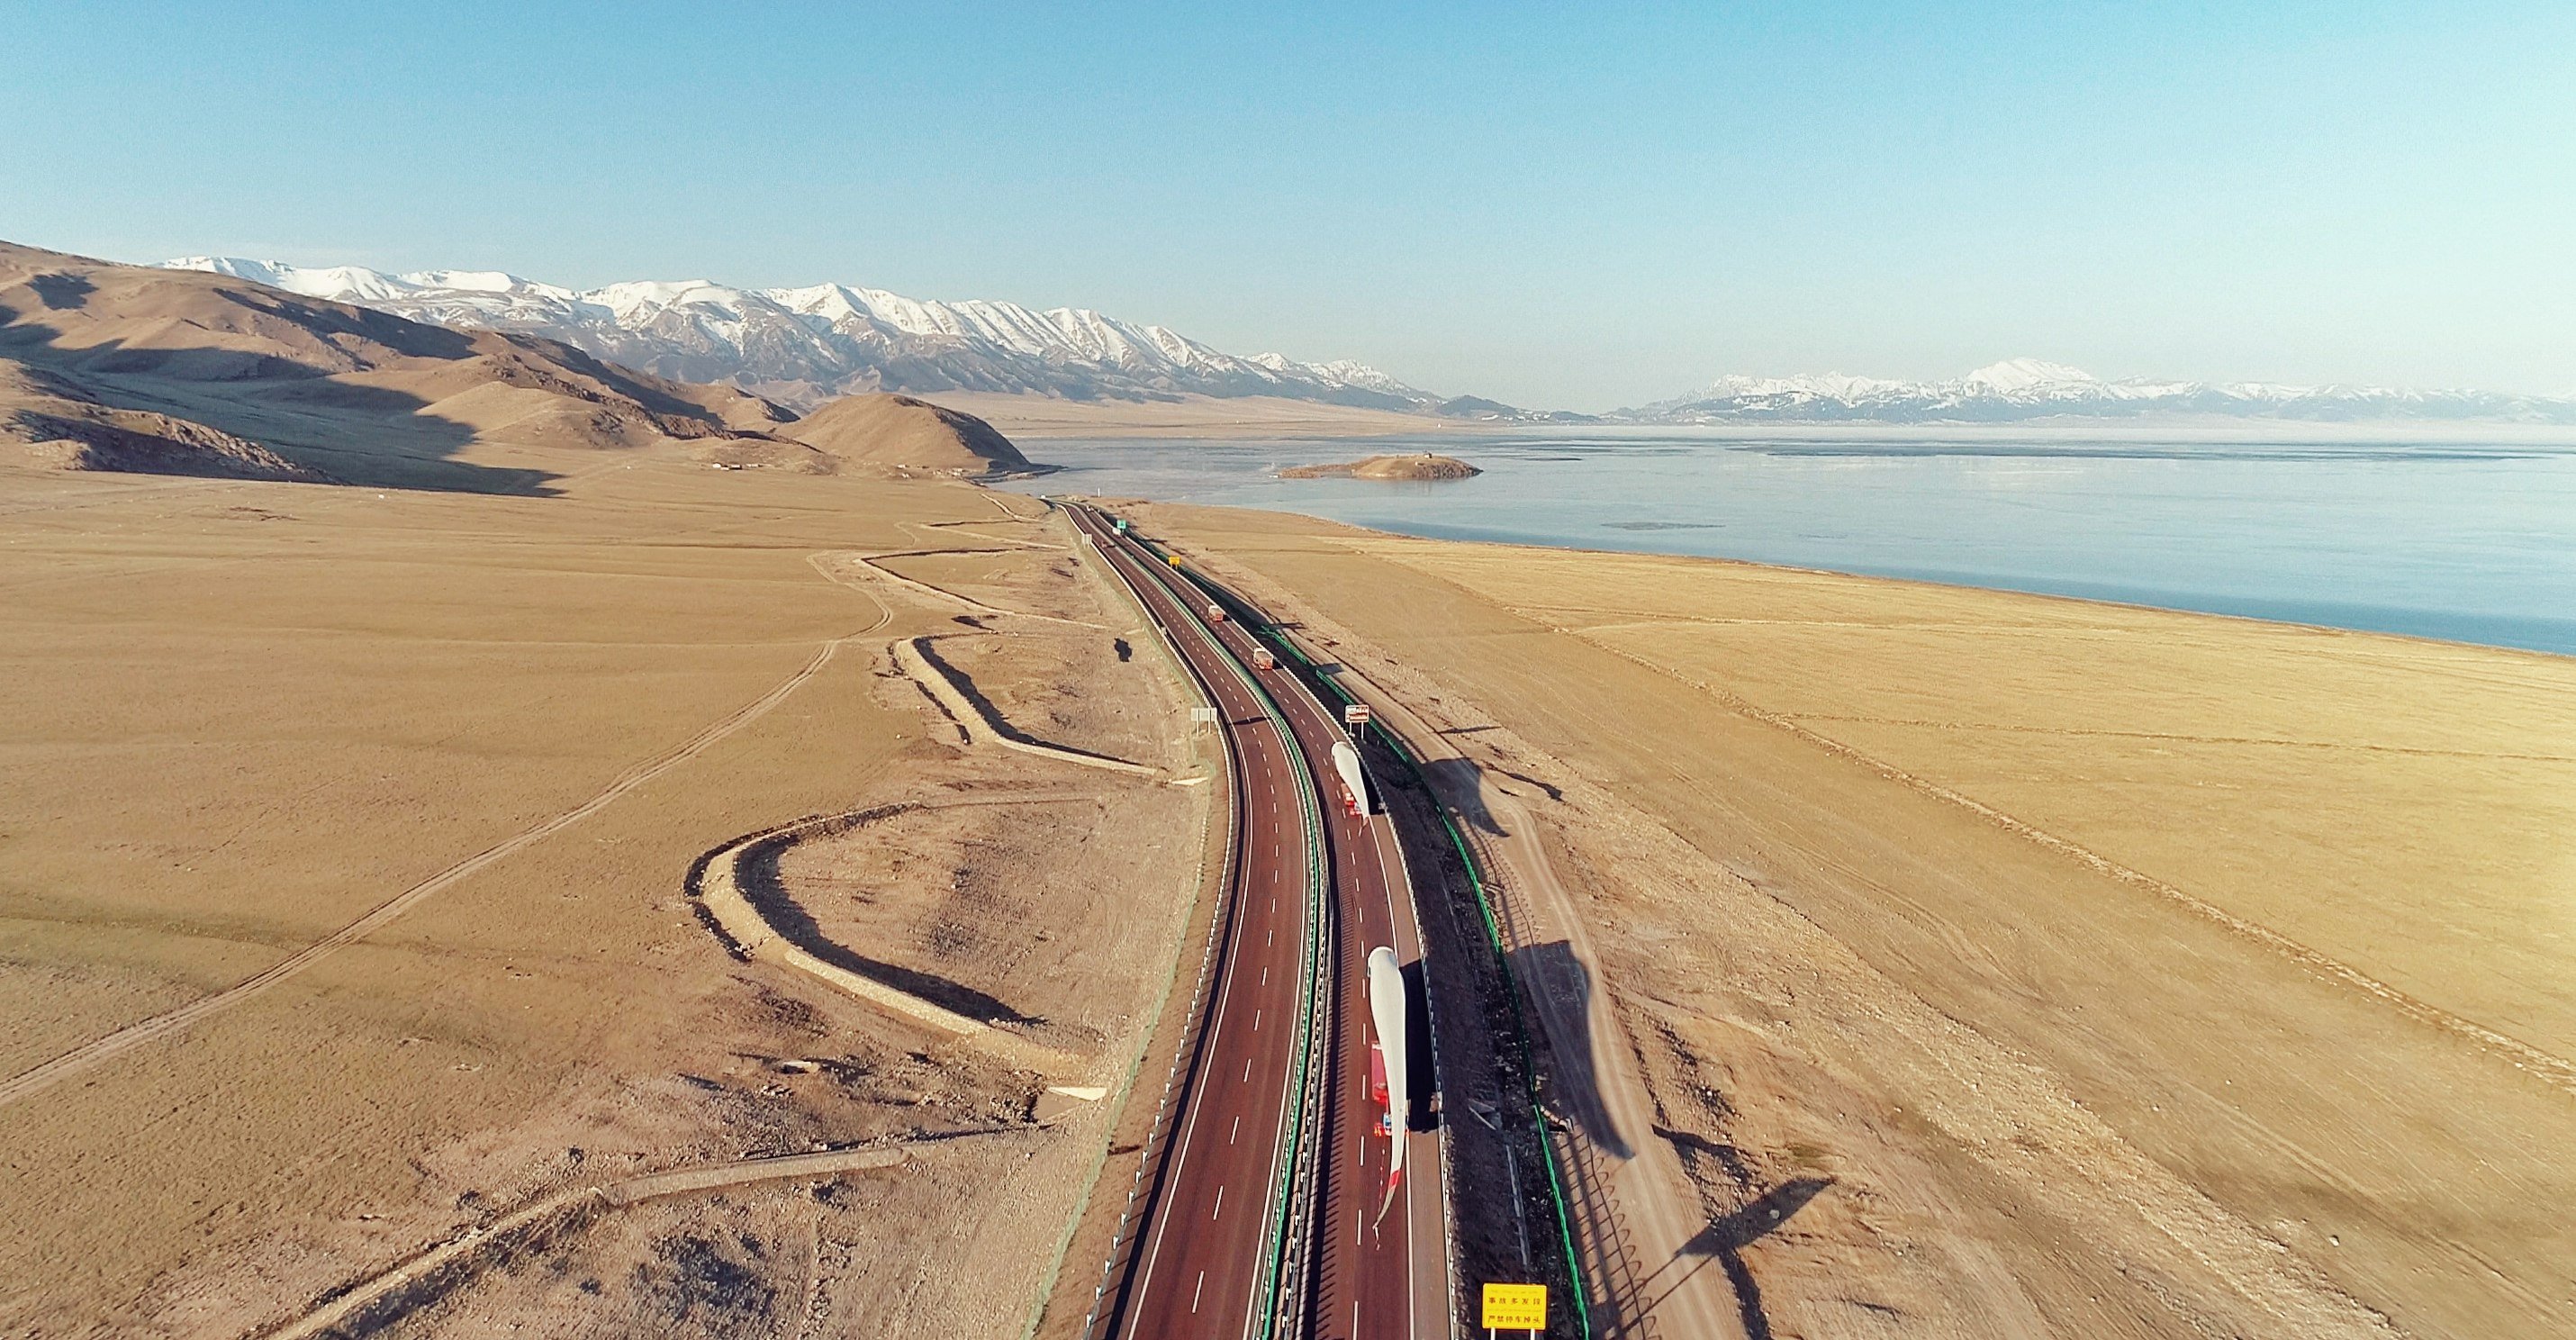 Photo taken on April 24, 2020 shows trucks loaded with wind turbine blades running on a road along the Sayram Lake basin in northwest China’s Xinjiang Uygur Autonomous Region. These wind turbine blades are used for a 50-megawatt wind farm in Kazakhstan’s Kostanay Region Photo: Xinhua